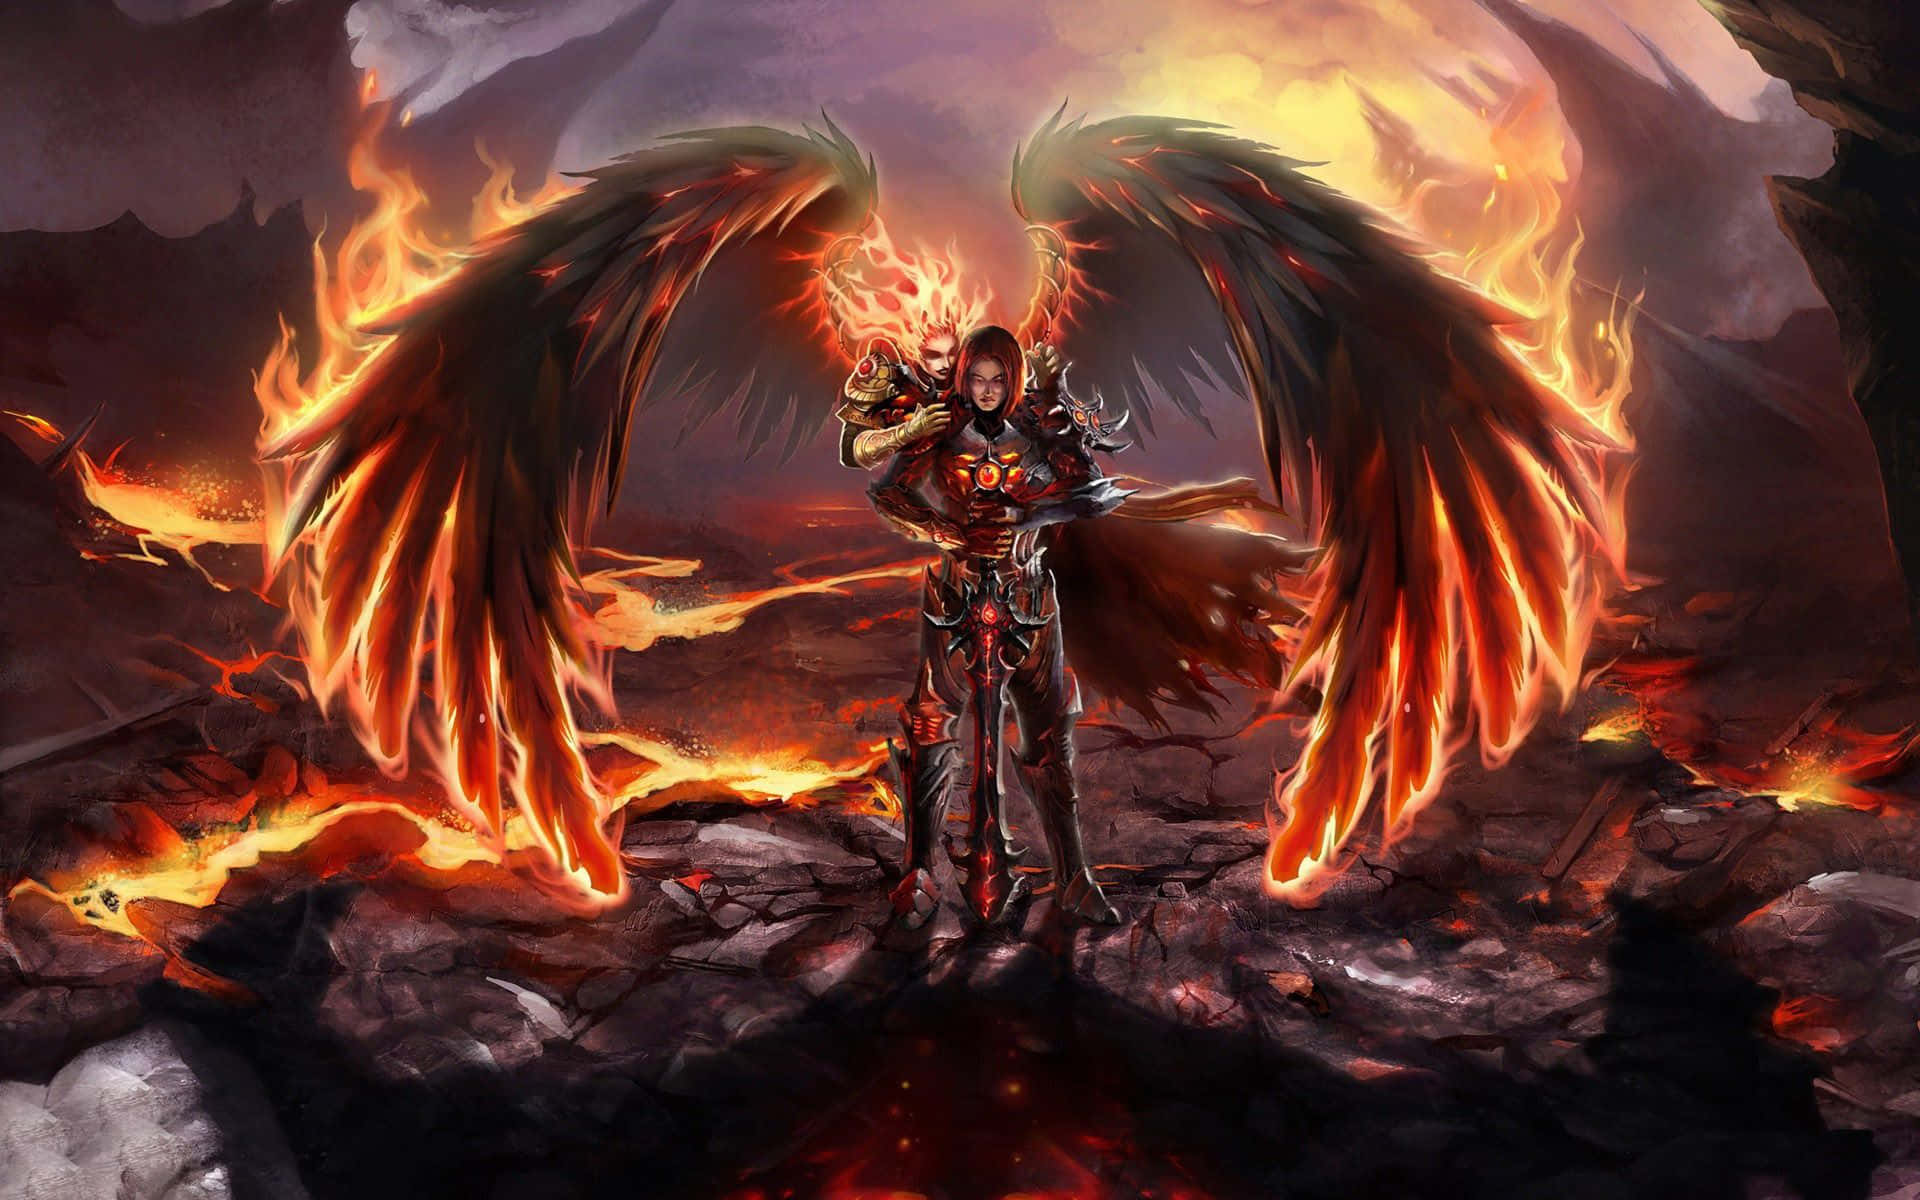 A Demon With Wings Standing In A Fire